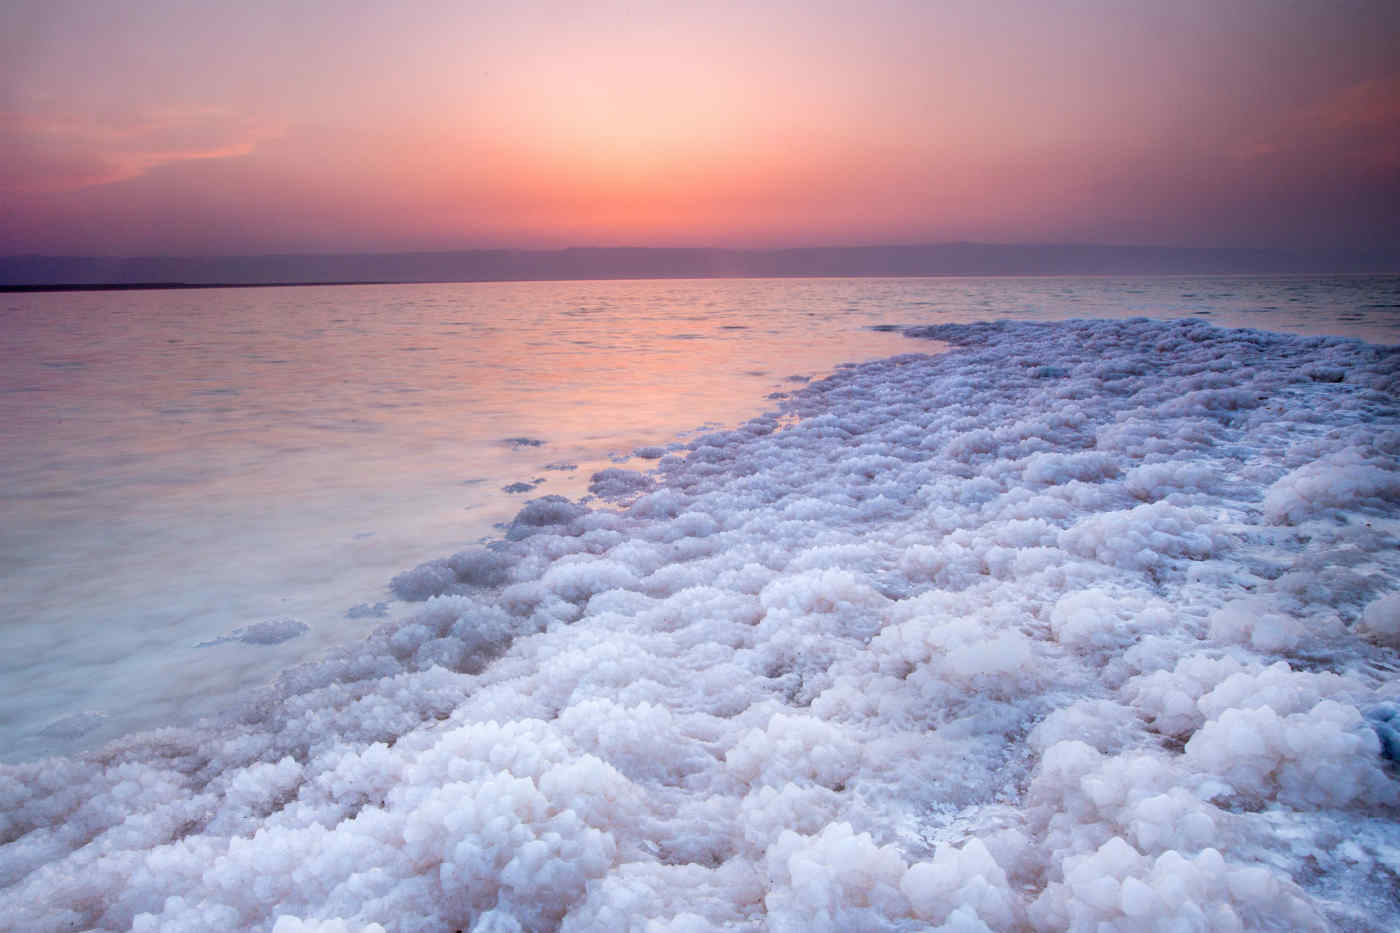 10 Fun Facts About the Dead Sea - Plus Even More Interesting Facts